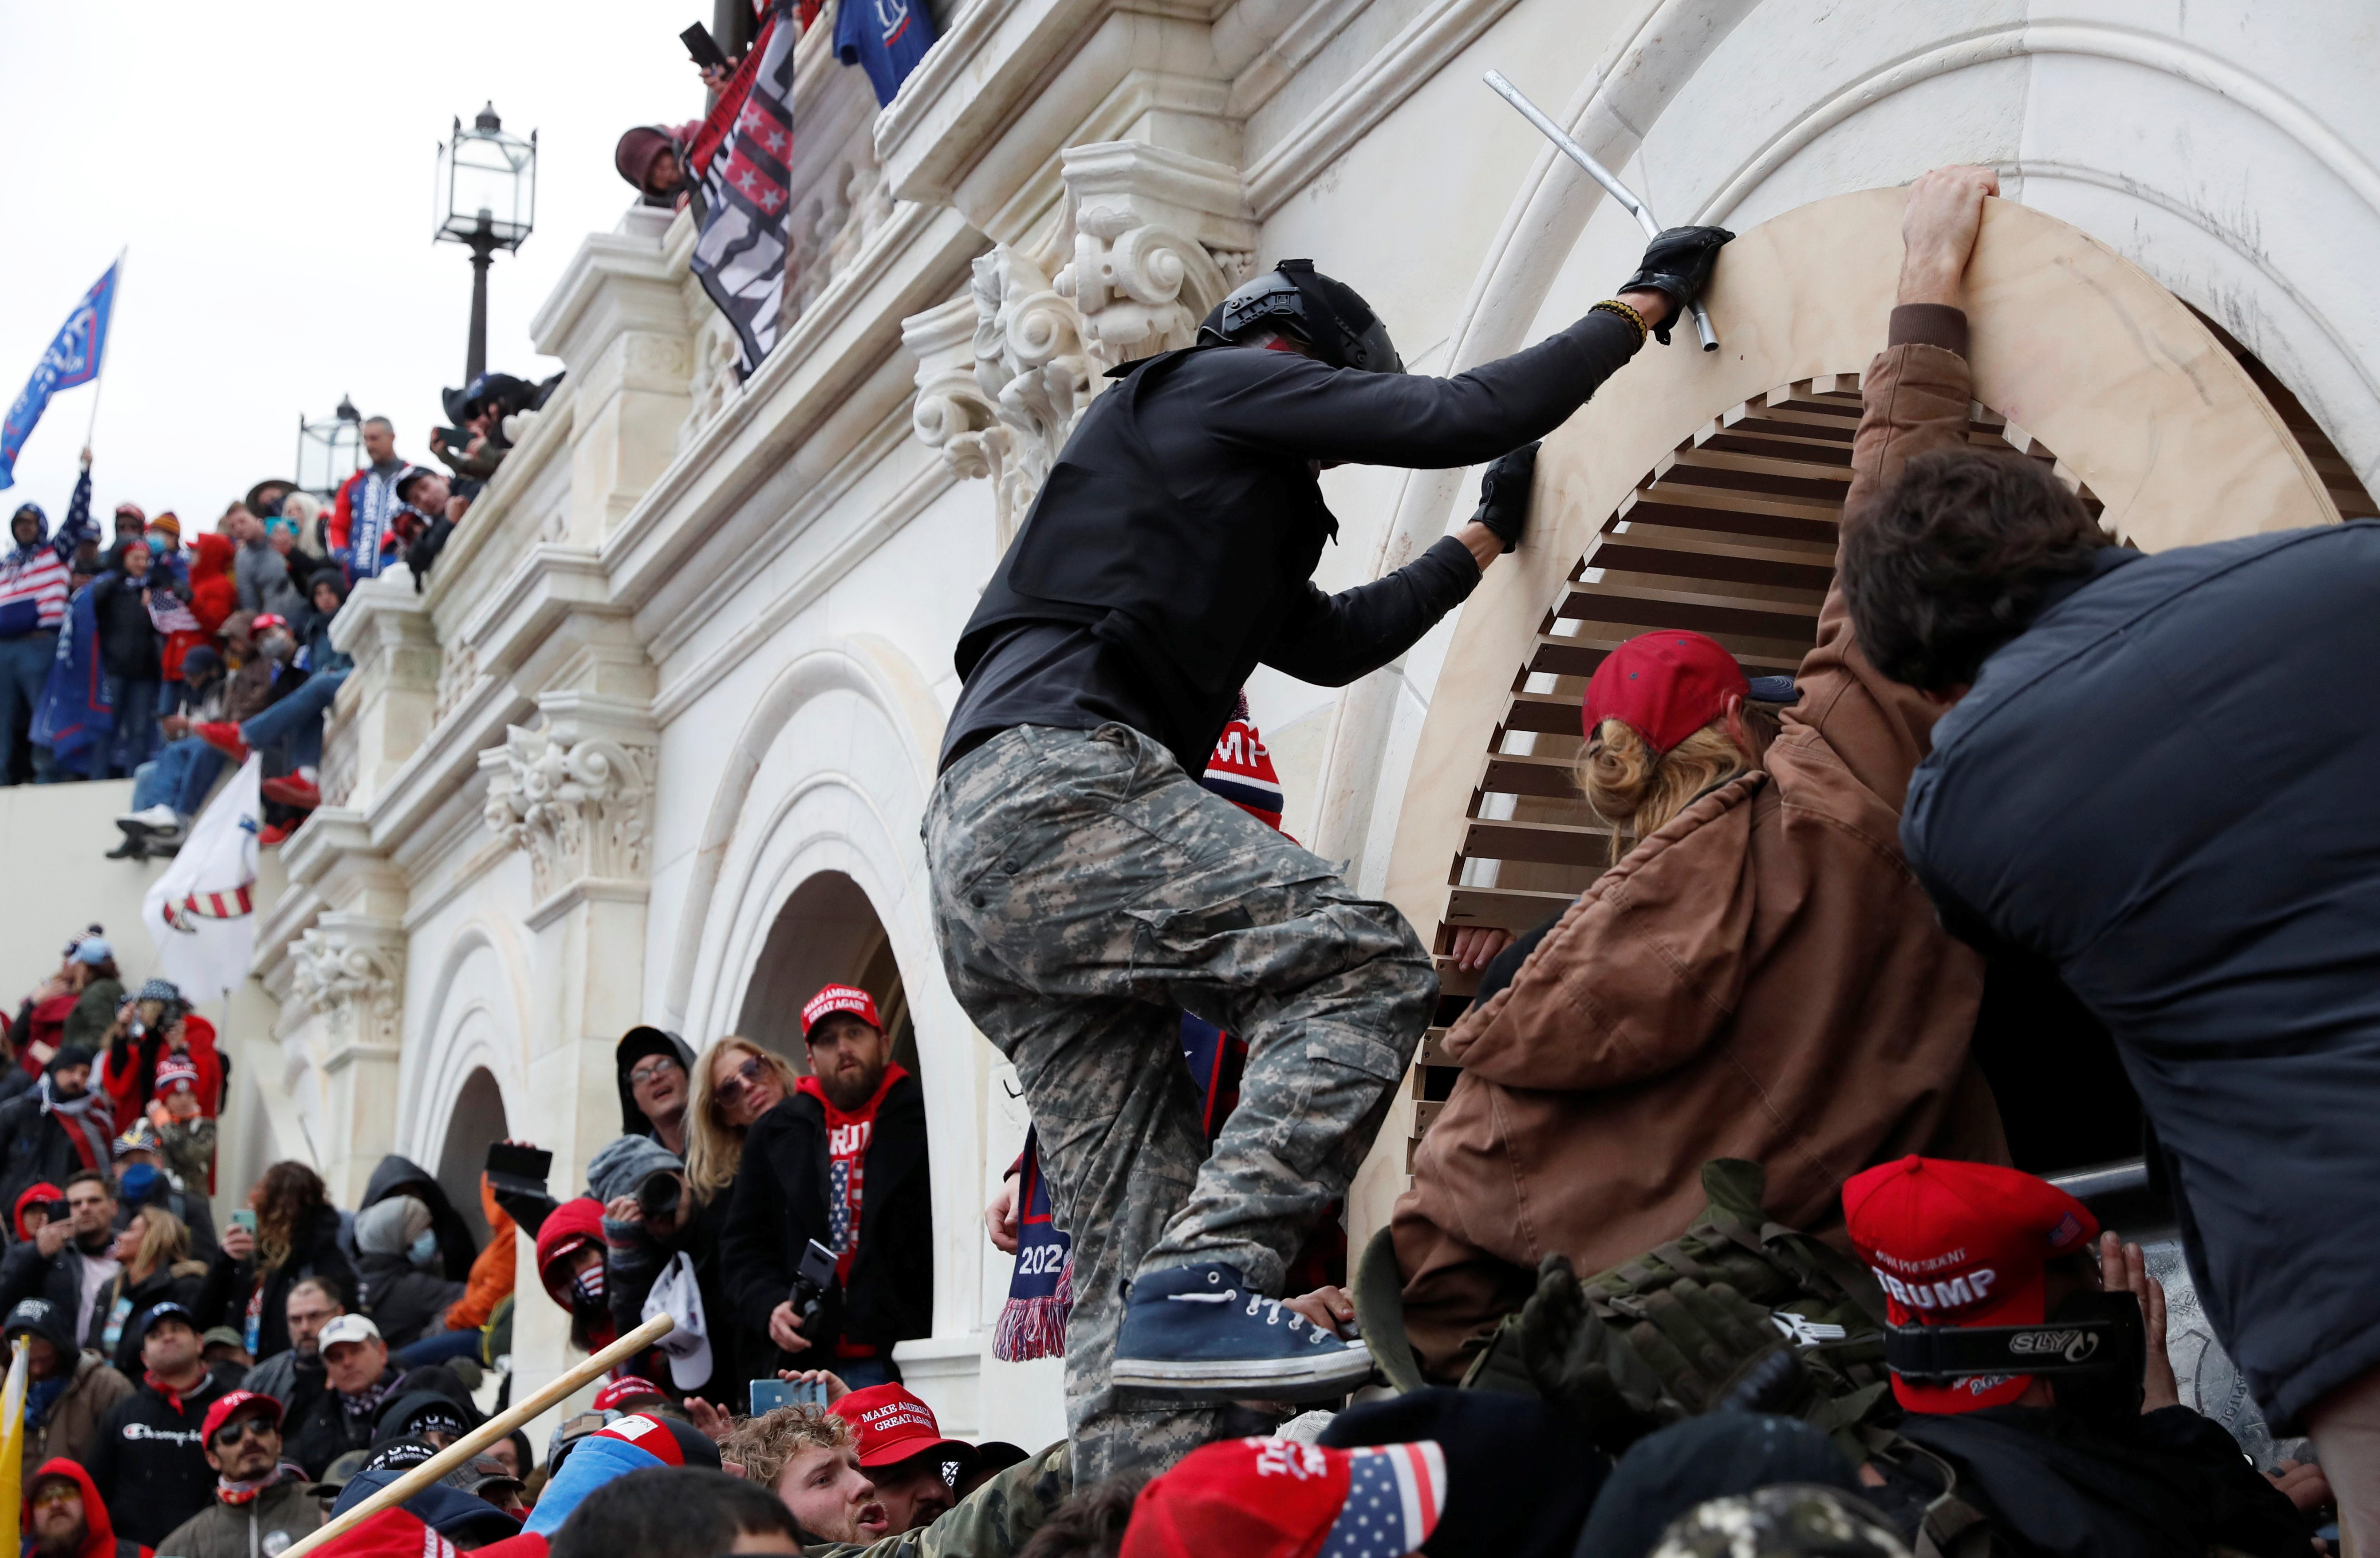 US lawmakers say police downplayed threat of violence before Capitol siege